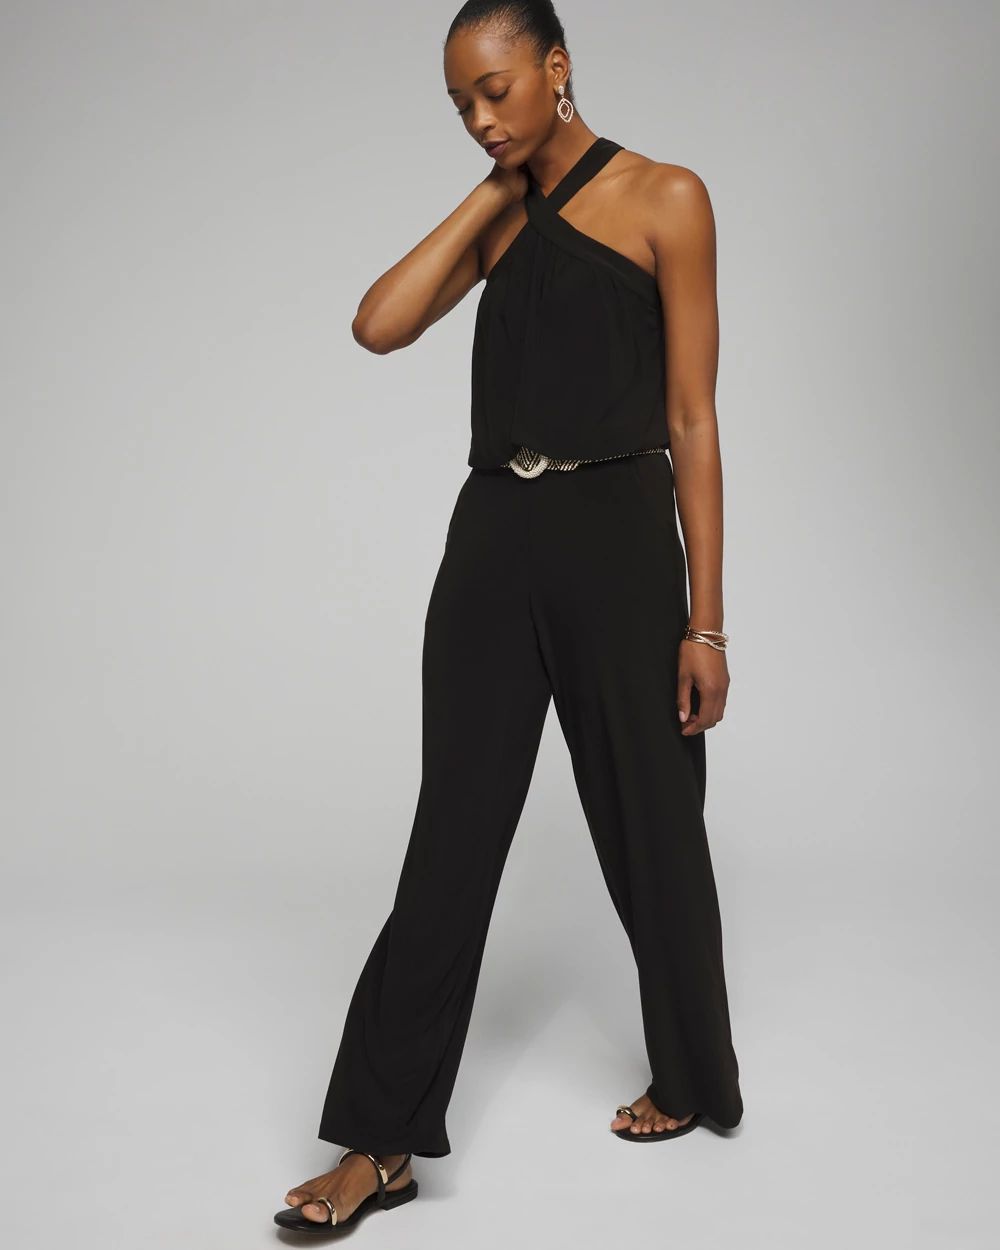 Outlet WHBM Wide-Leg Pants click to view larger image.